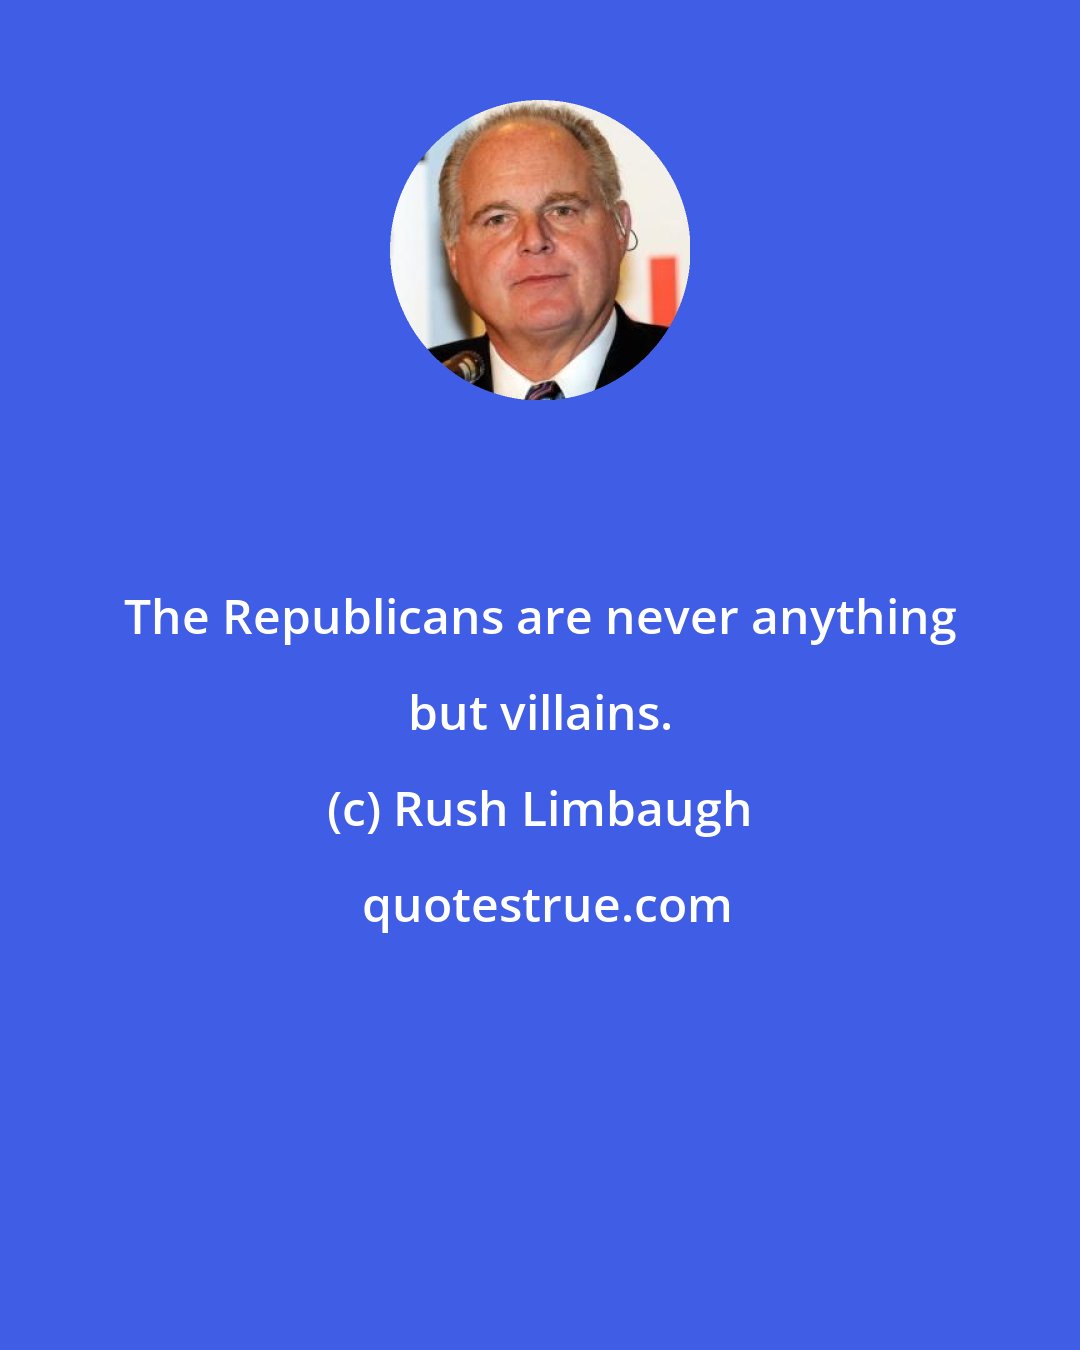 Rush Limbaugh: The Republicans are never anything but villains.